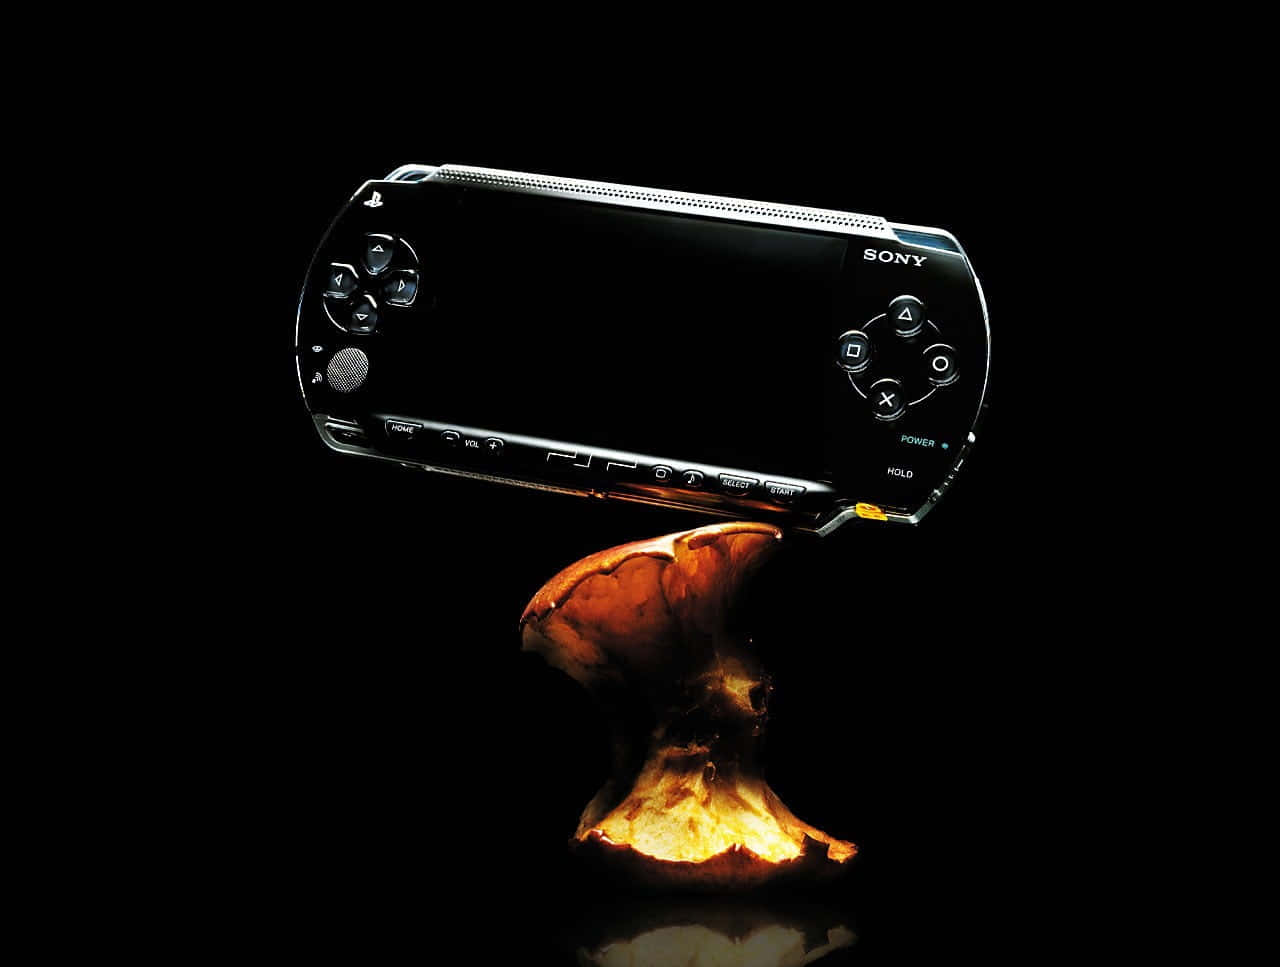 Psp Gaming Console on Multicolored Abstract Background